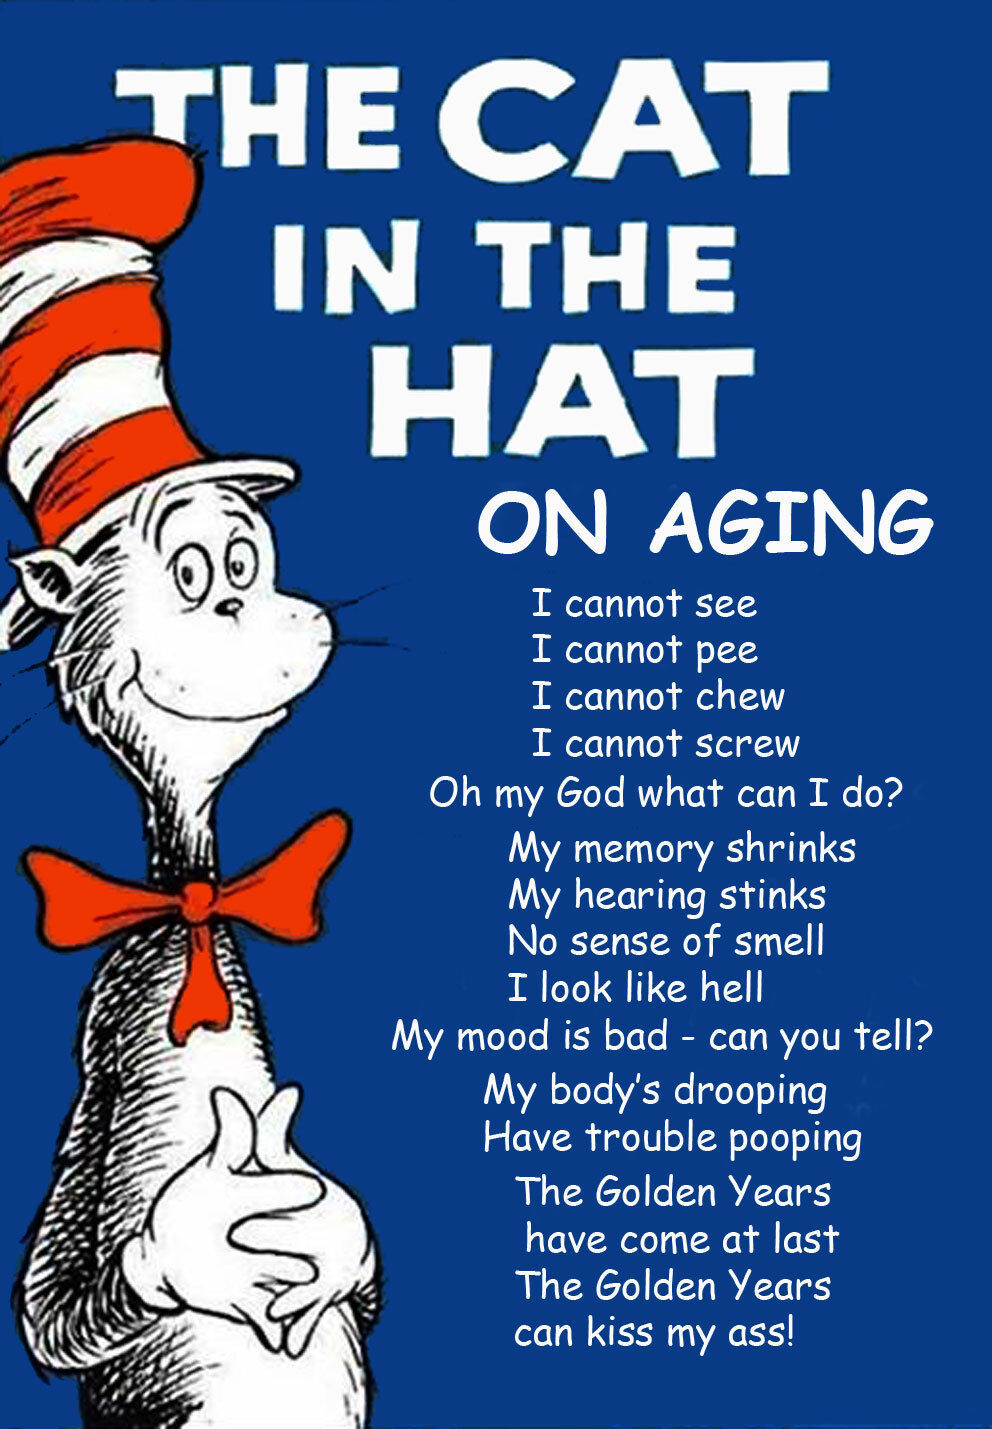 THE CAT IN THE HAT ON AGING HUMOROUS BEER FRIDGE LOCKER MAN CAVE MAGNET